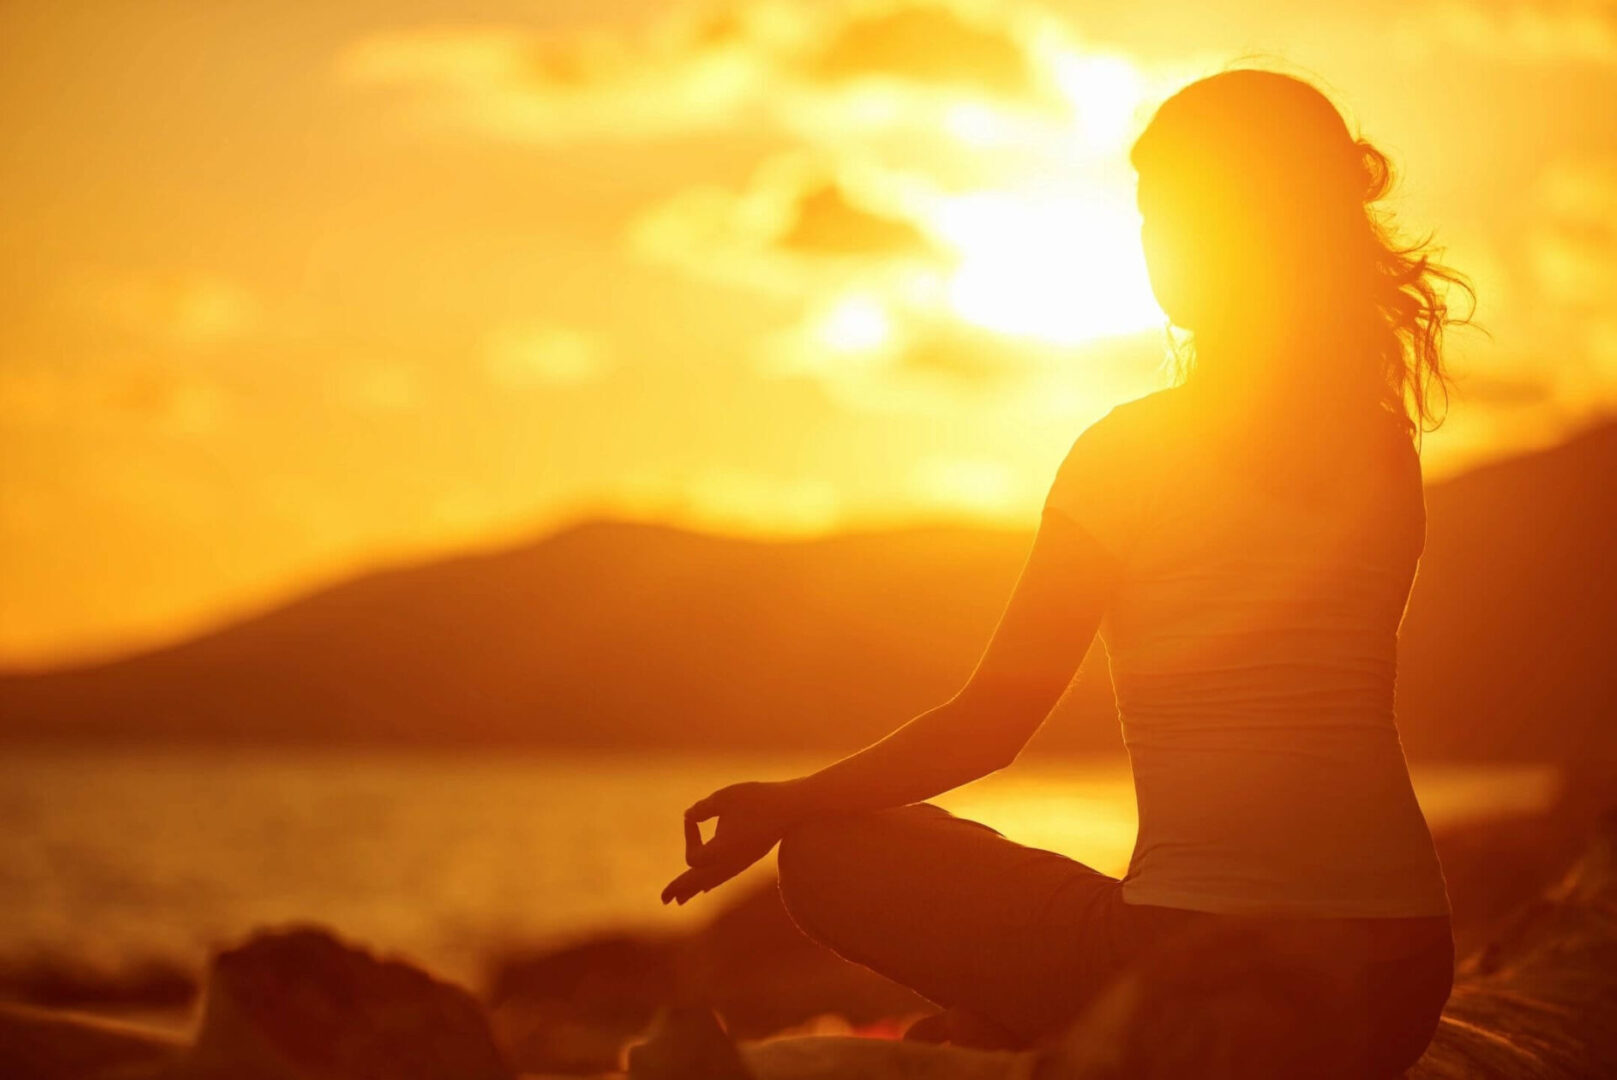 A person sitting in the sunset with their hands in yoga position.